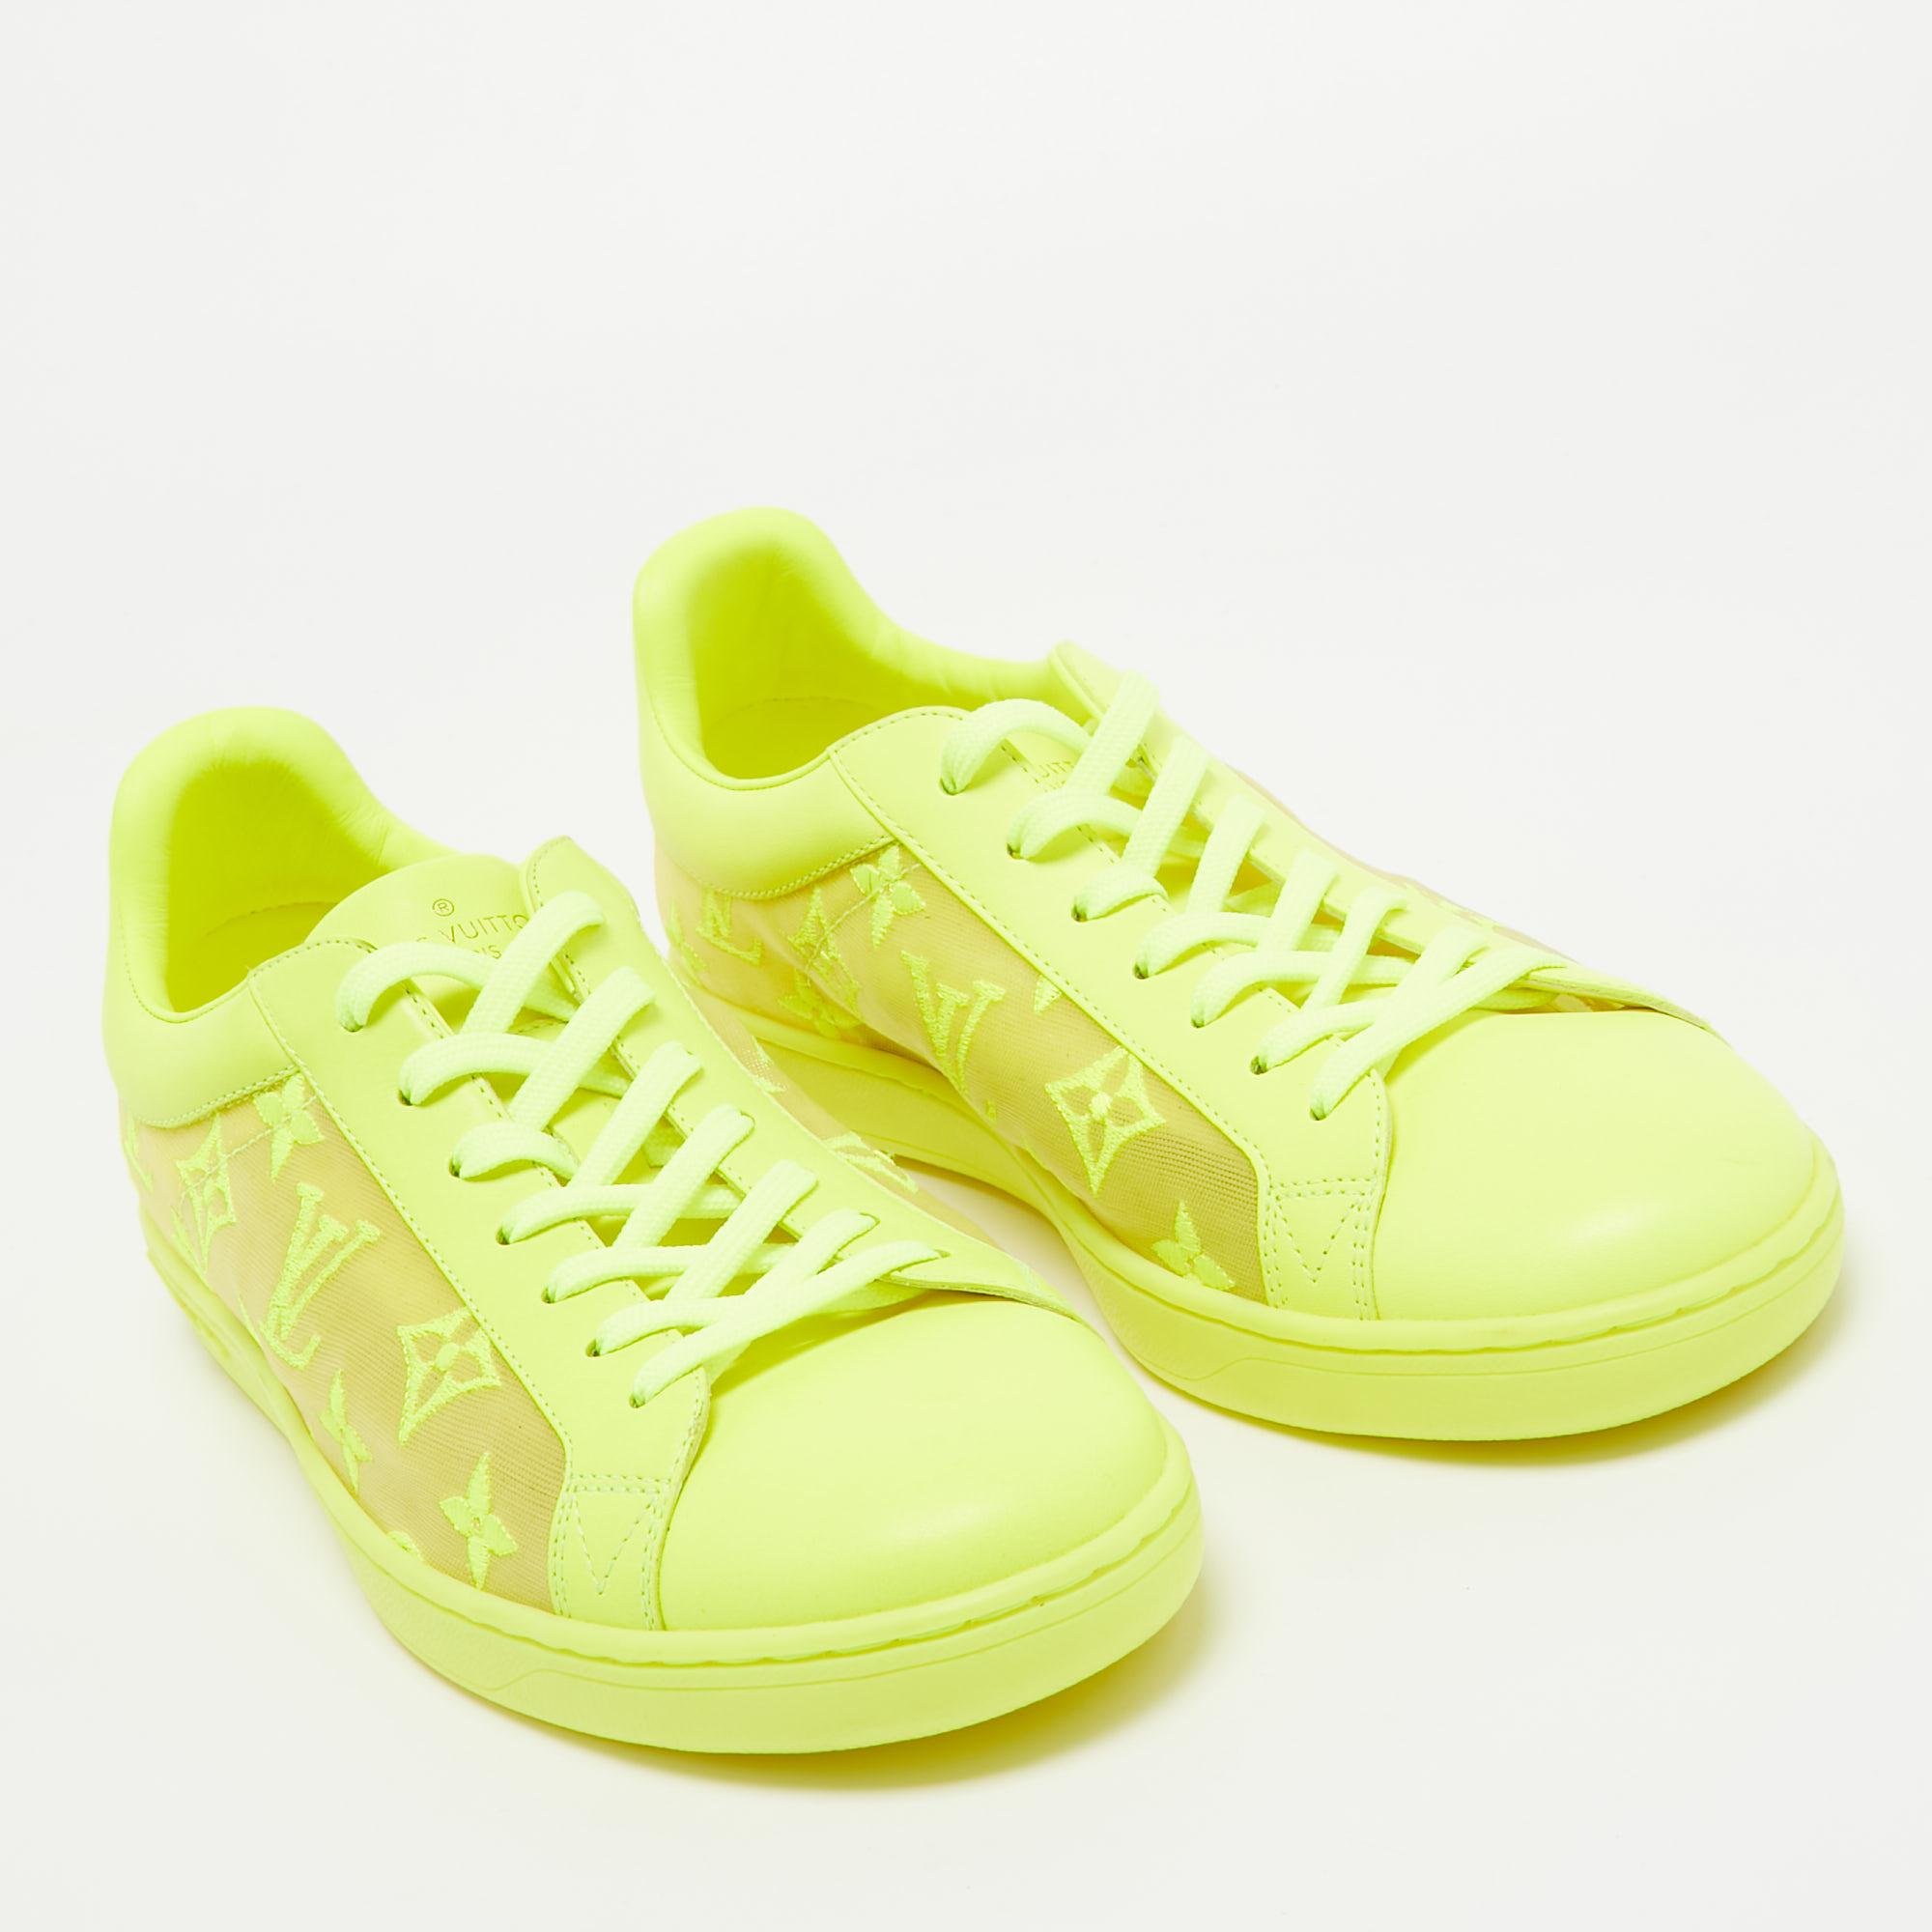 Louis Vuitton Neon Yellow Leather And Monogram Embroidered Mesh Luxembourg Sneakers Size 40